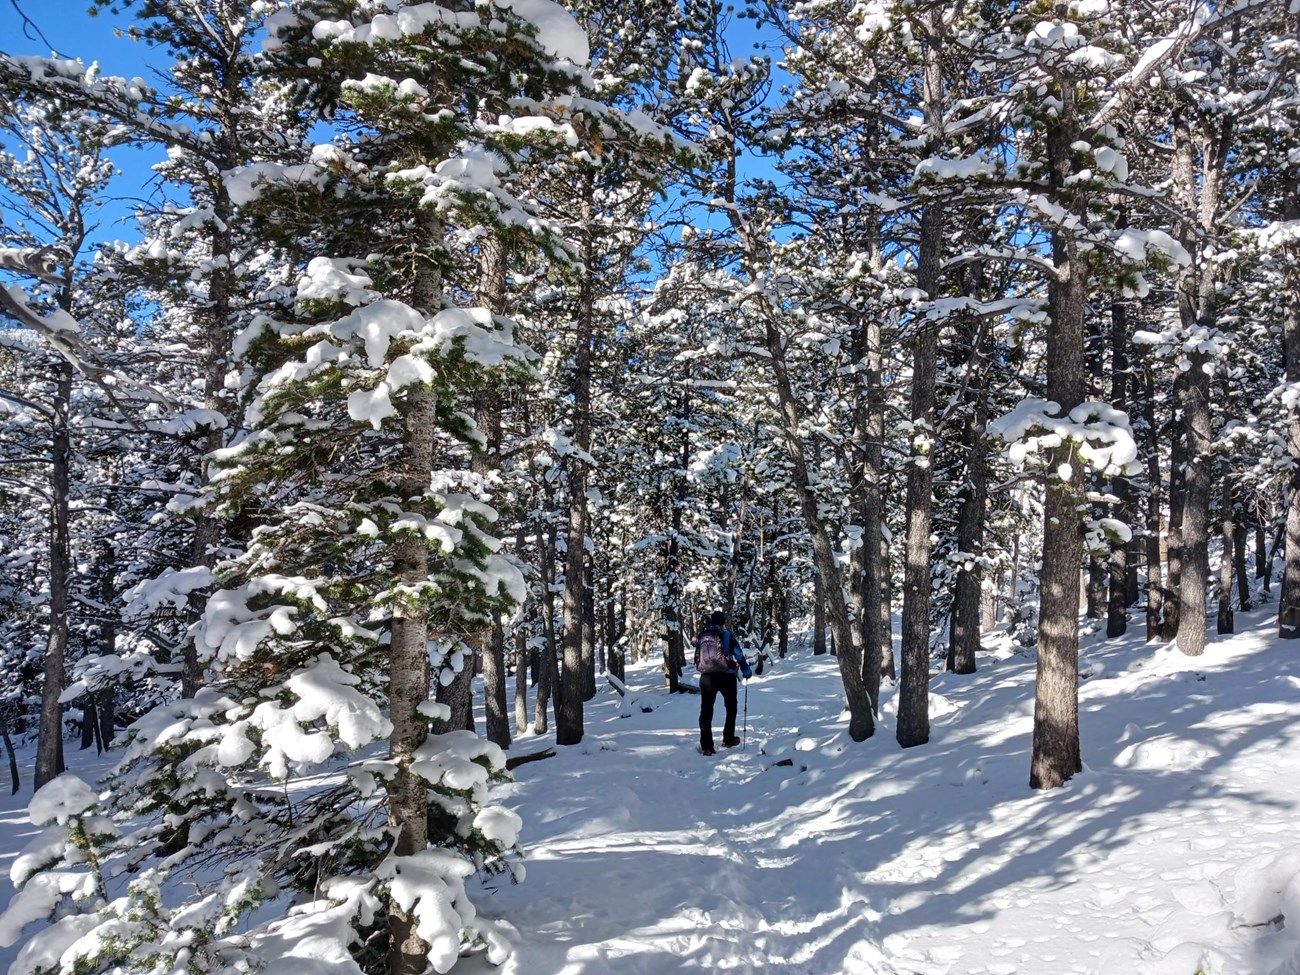 A person is hiking on a snow-covered trail lined with snow-covered pine trees in winter.